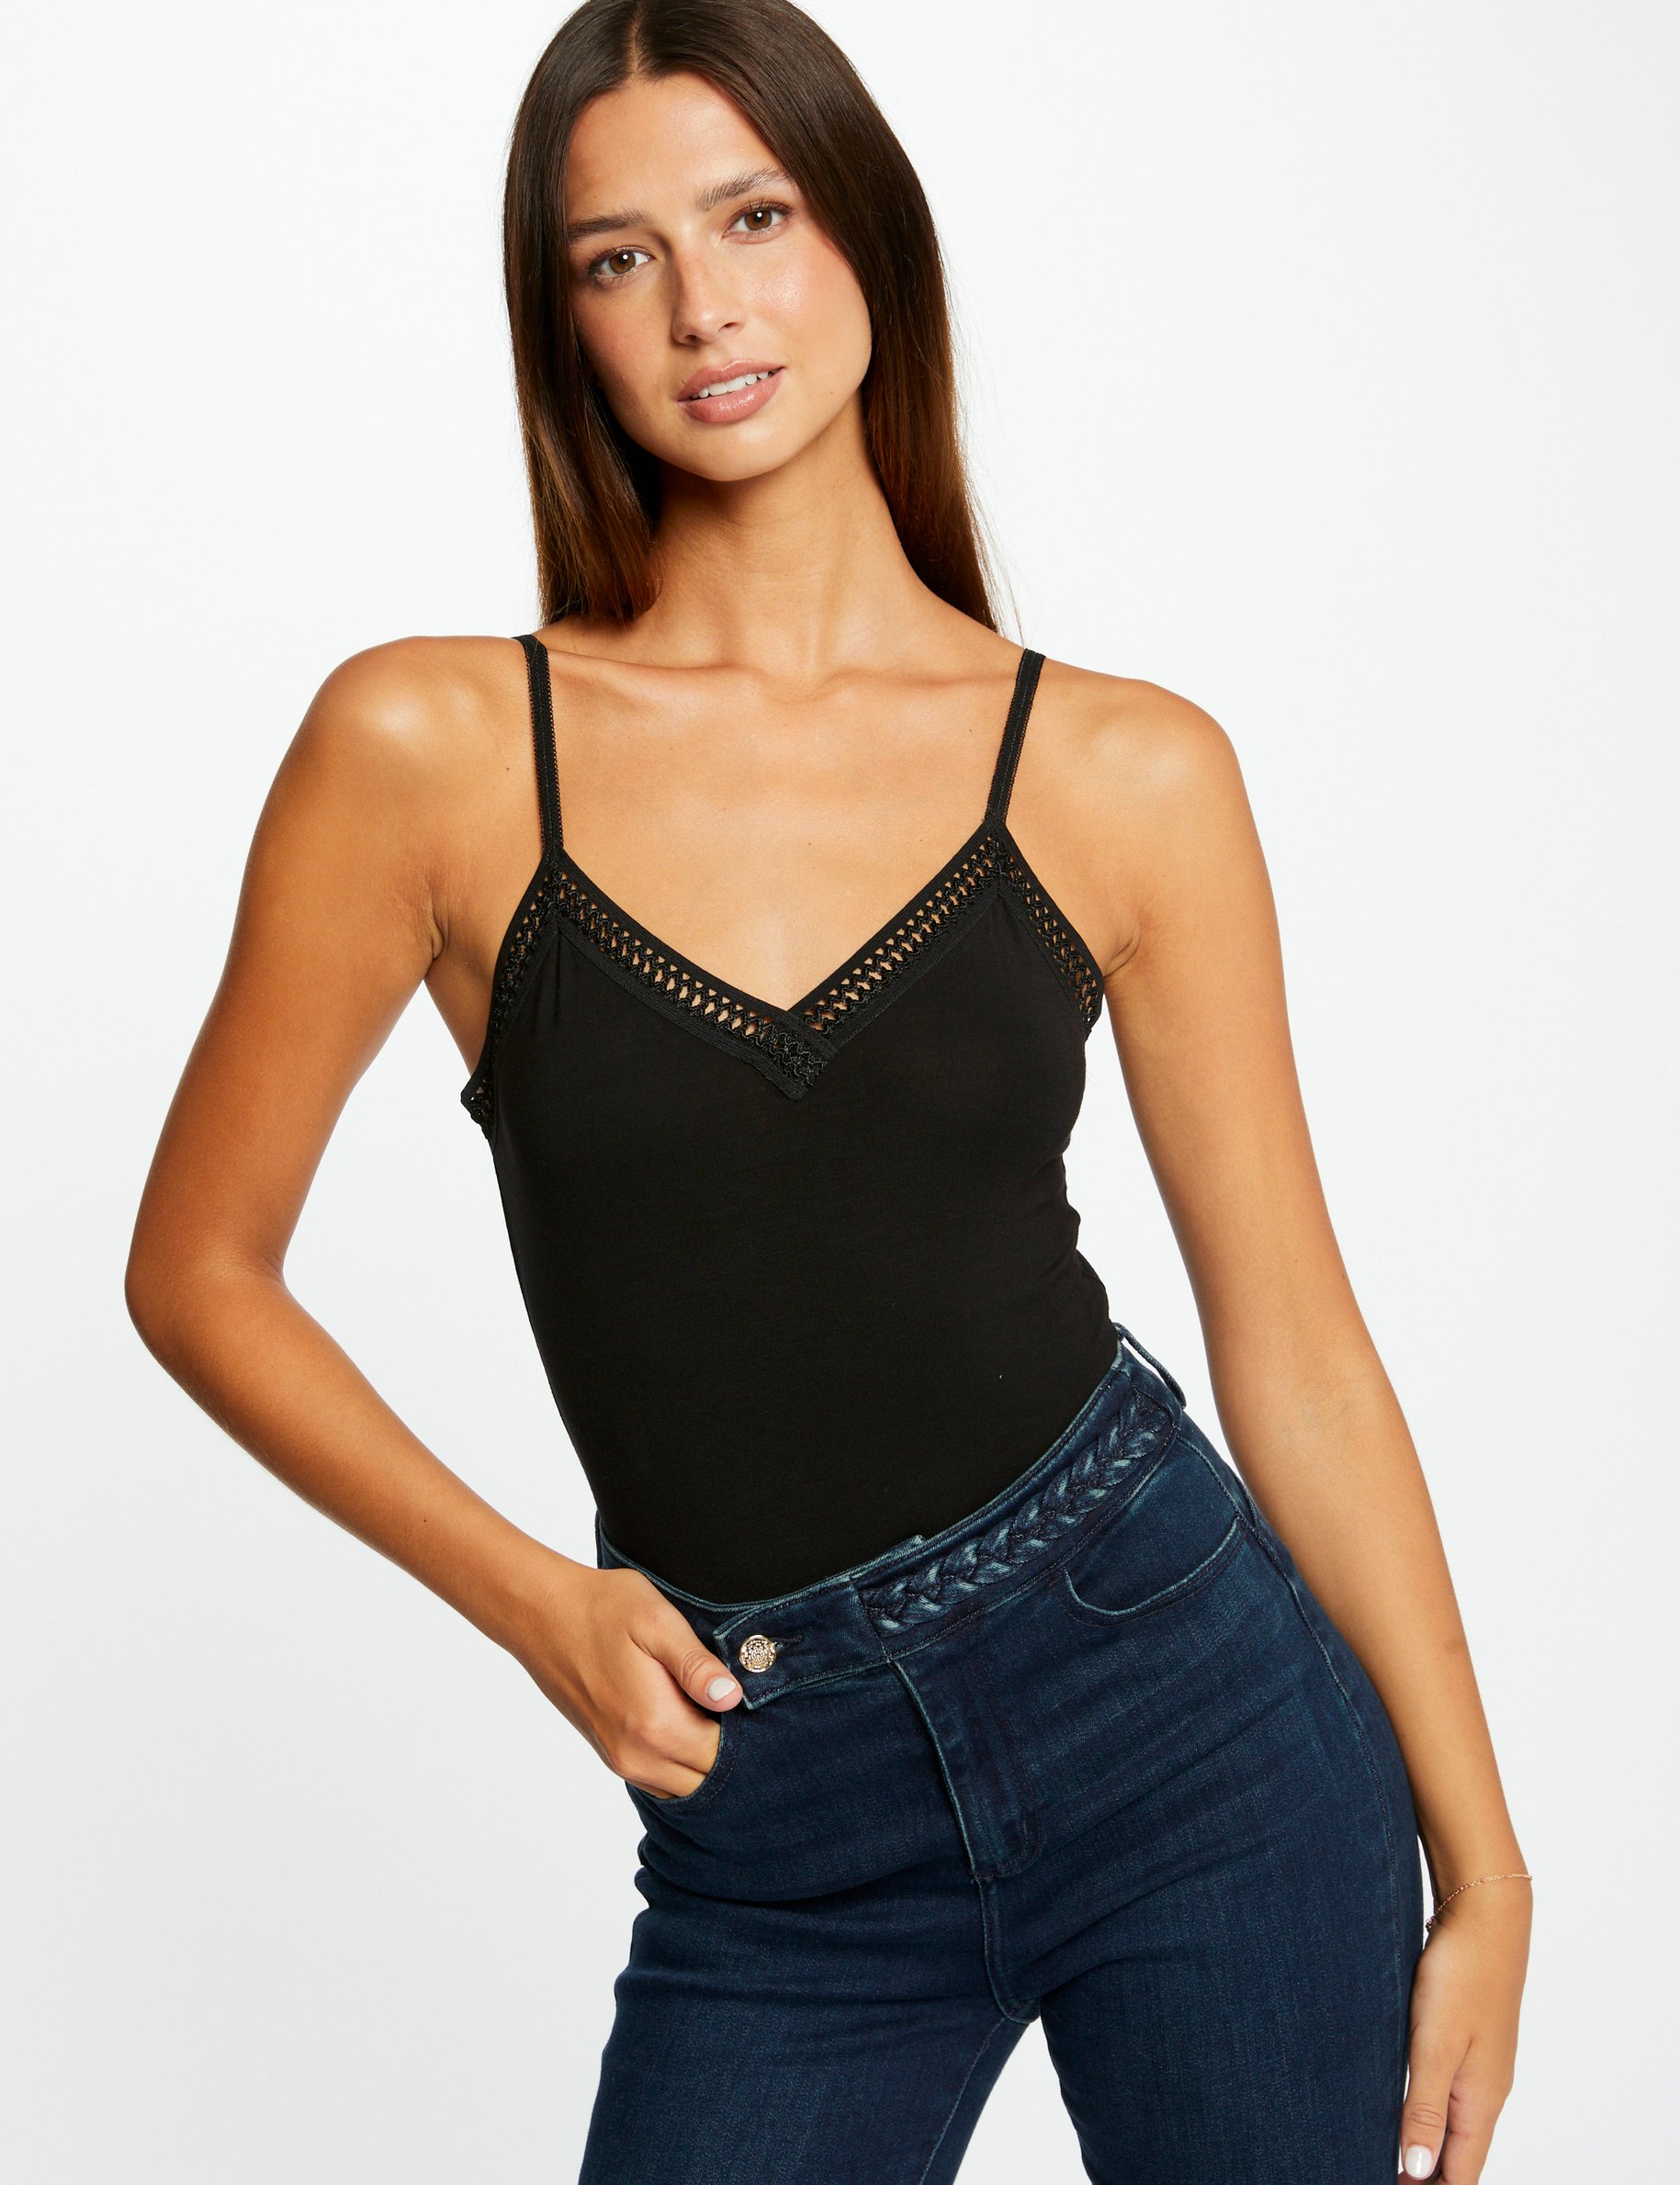 Vest top thin straps with lace strips black ladies'